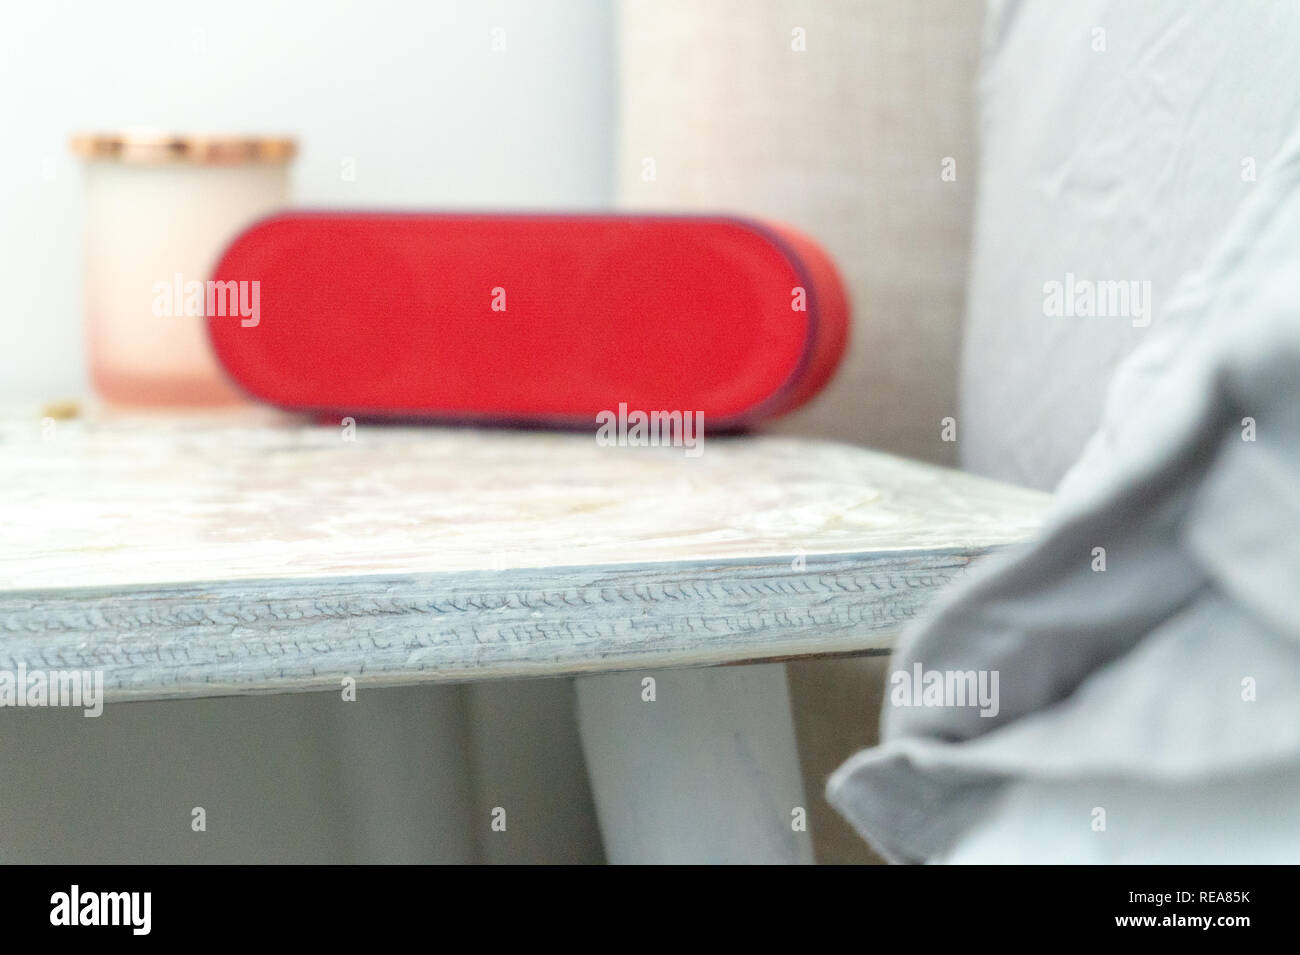 Bright red radio alarm clock and candle jar on a bedside table nightstand, with bed and linens showing in soft colors. Stock Photo